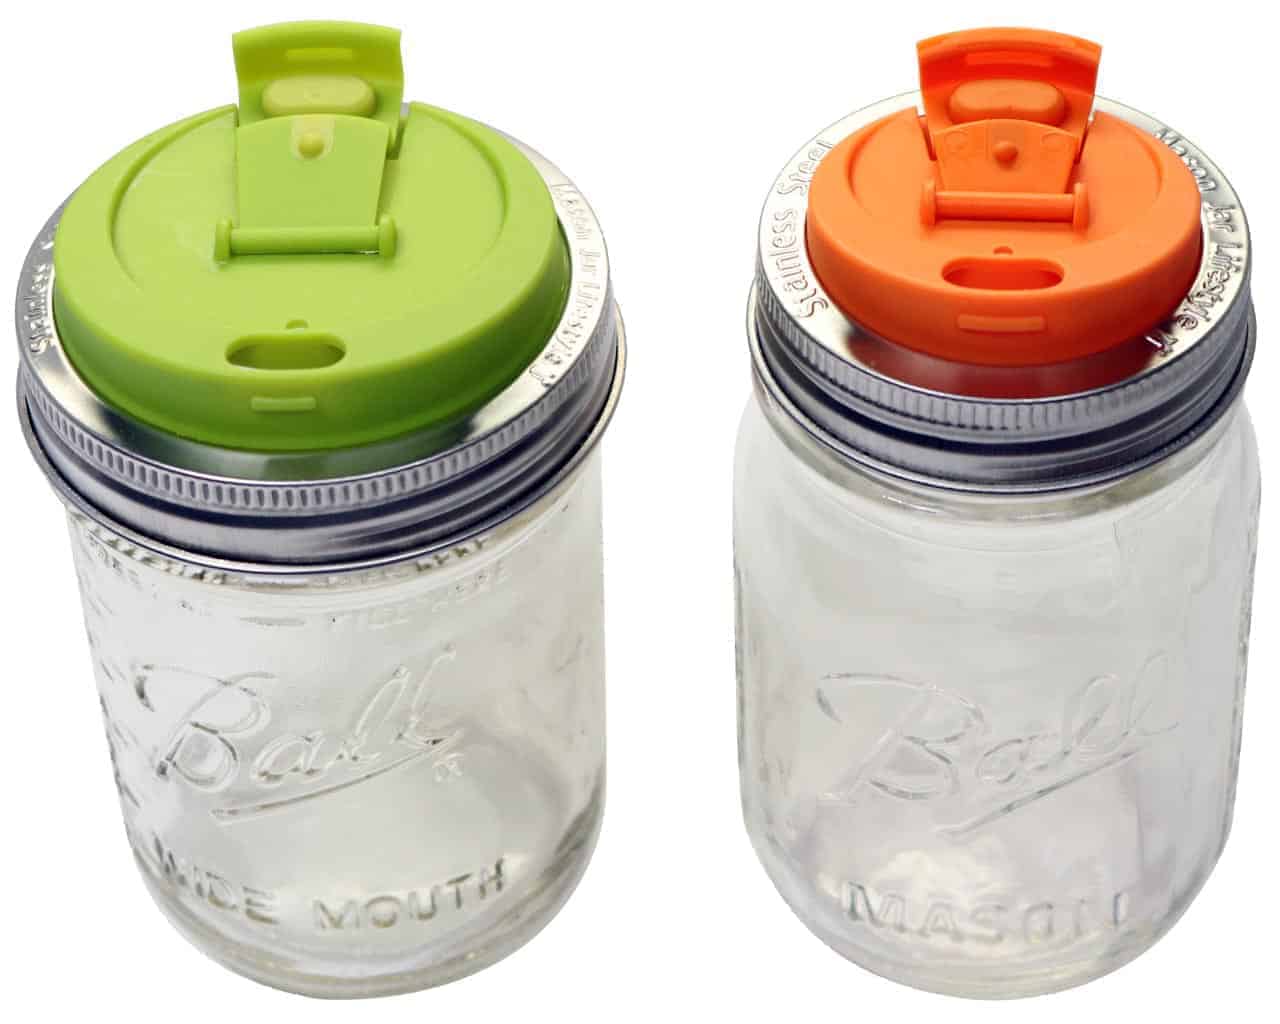 mjl-rust-proof-stainless-steel-bands-stamped-regular-wide-mouth-mason-jars-jarware-drinking-lids-silicone-sleeves